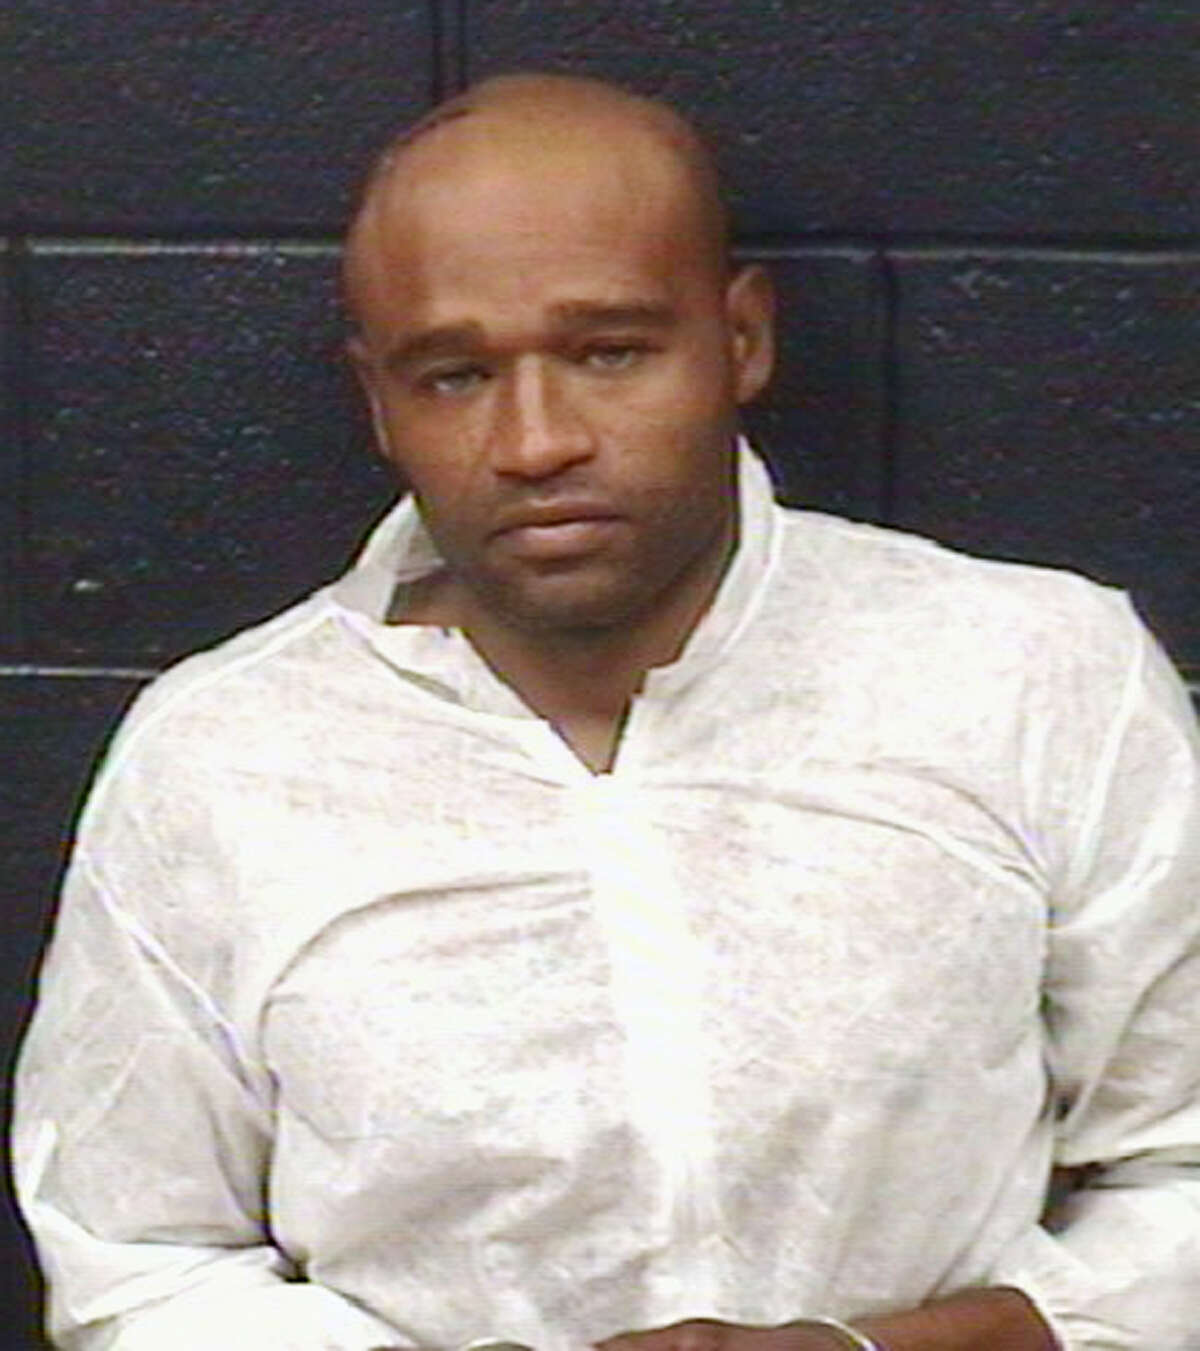 This photo provided by the Laredo Police Department shows Demond Blunston. Police have charged Bluntson with capital murder in the shooting death of his 21-month-old son. He is also under suspicion for shooting and critically wounding his girlfriend, Brandy Cerny's 6-year-old son on Tuesday at a Laredo, Texas hotel. Cerny's body has been found about 200 miles away.